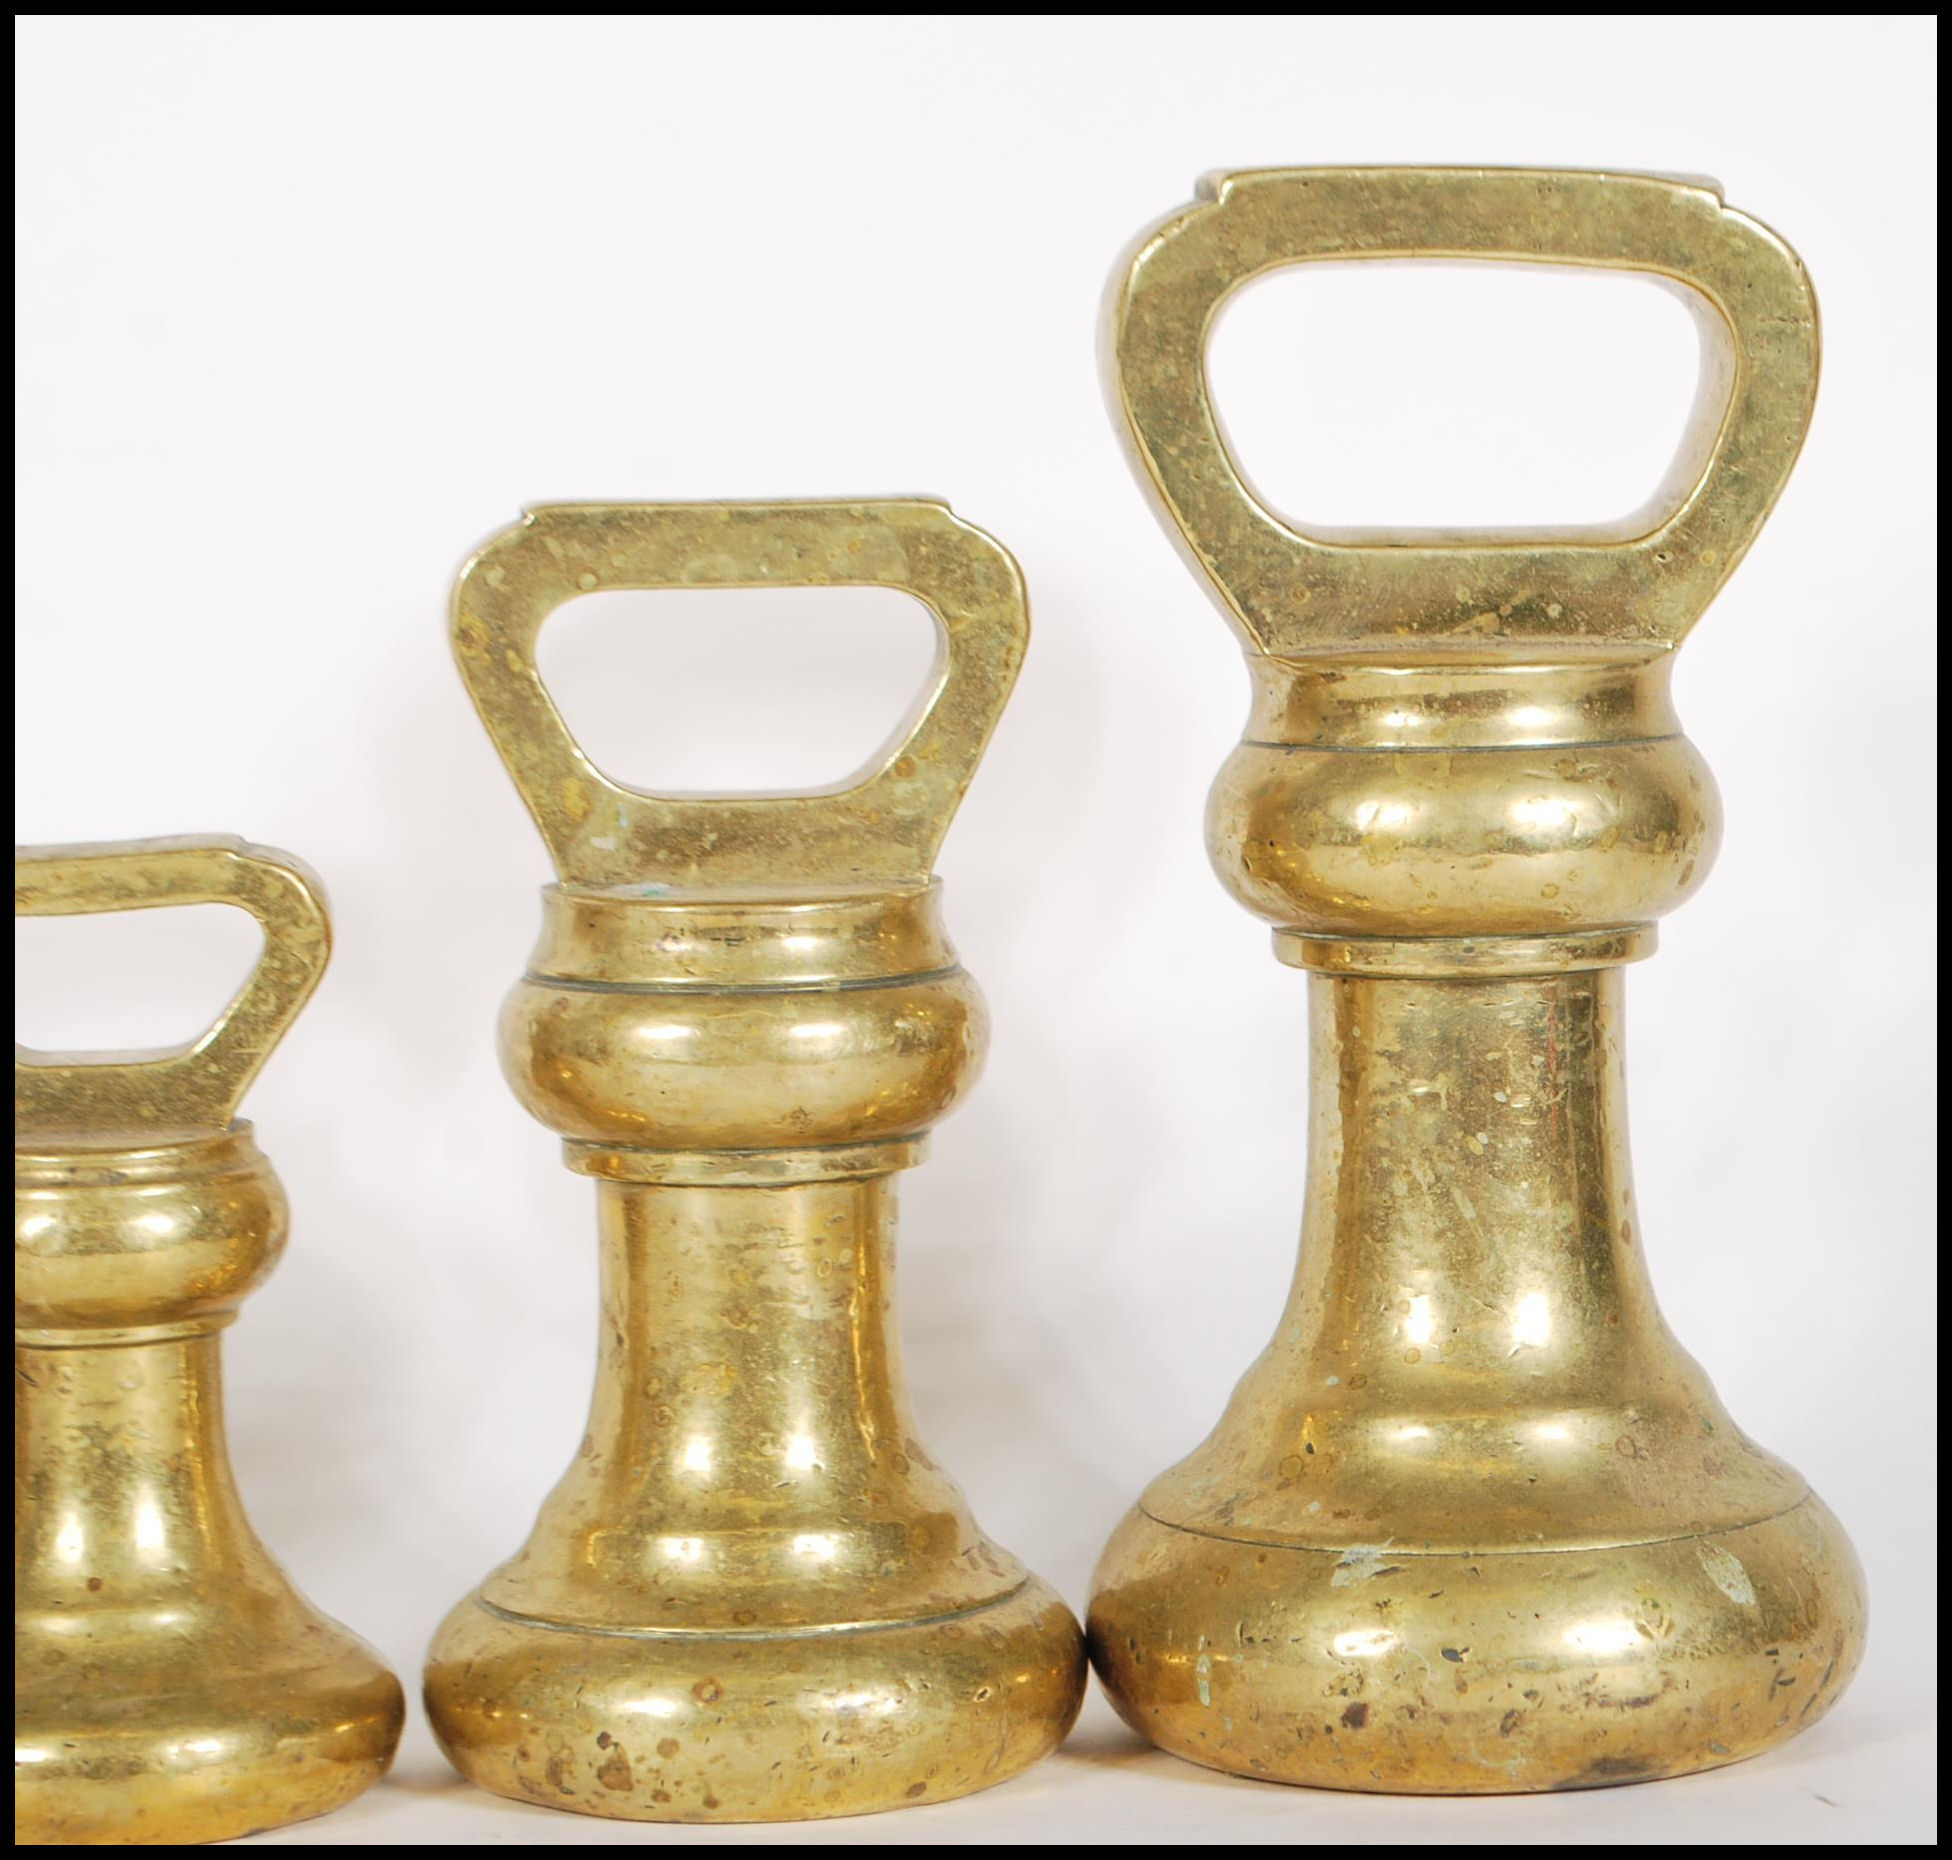 A selection of 20th century graduating brass bell weights having carrying handles atop, with the - Image 4 of 7